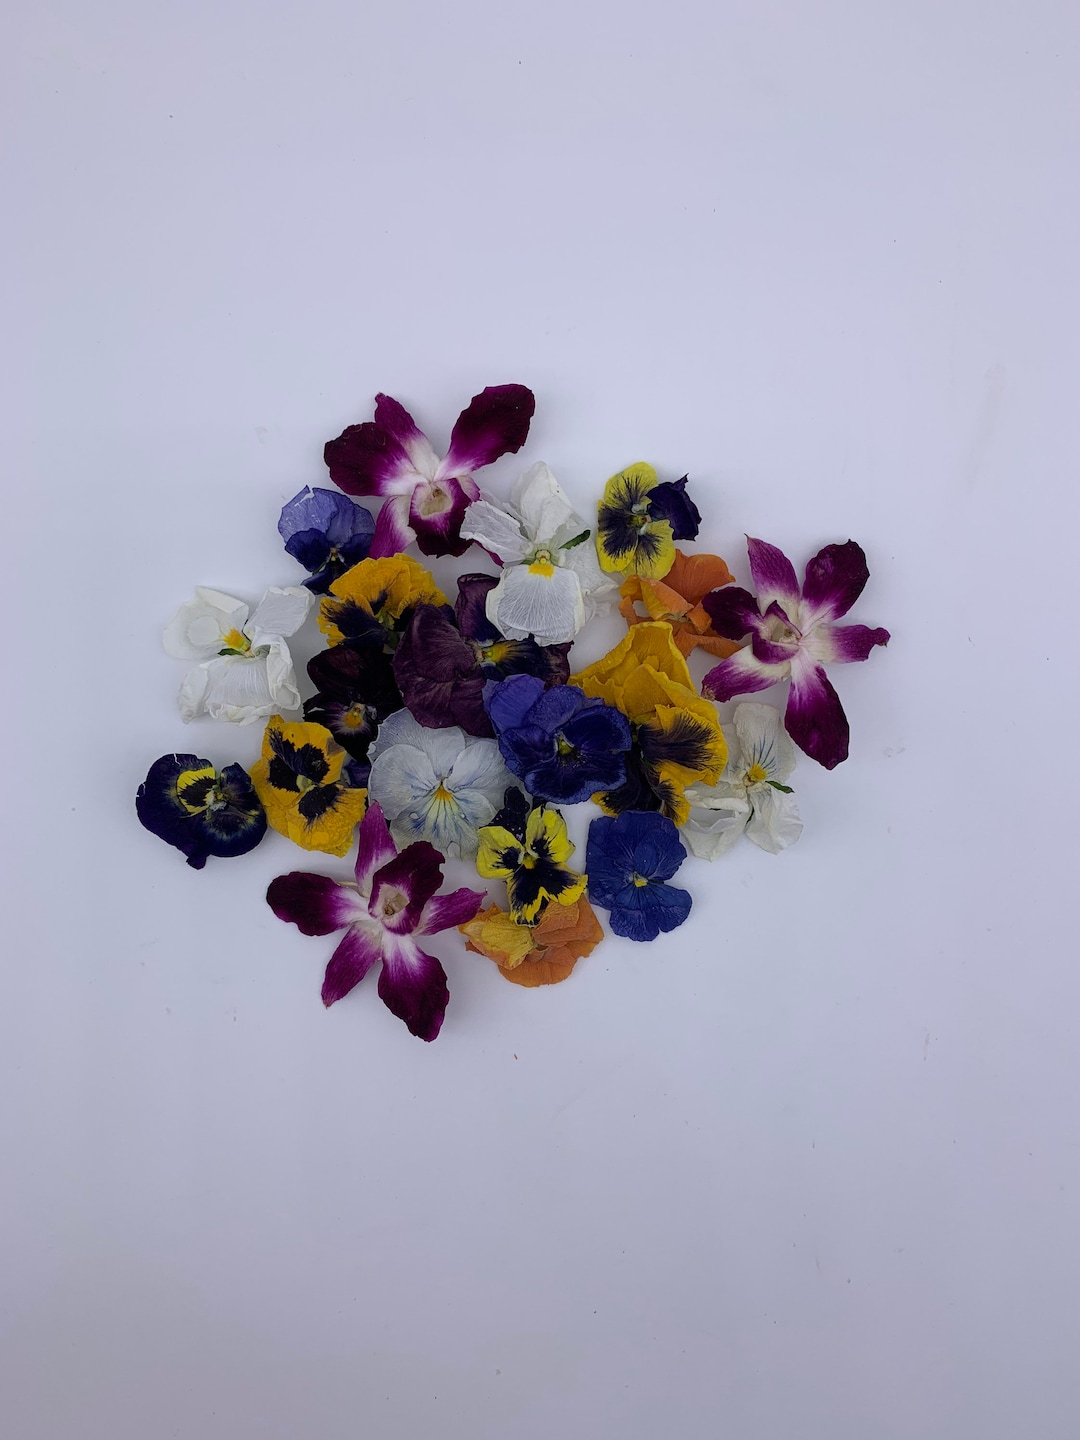 Wholesale Dried Edible Flowers To Decorate Your Environment 